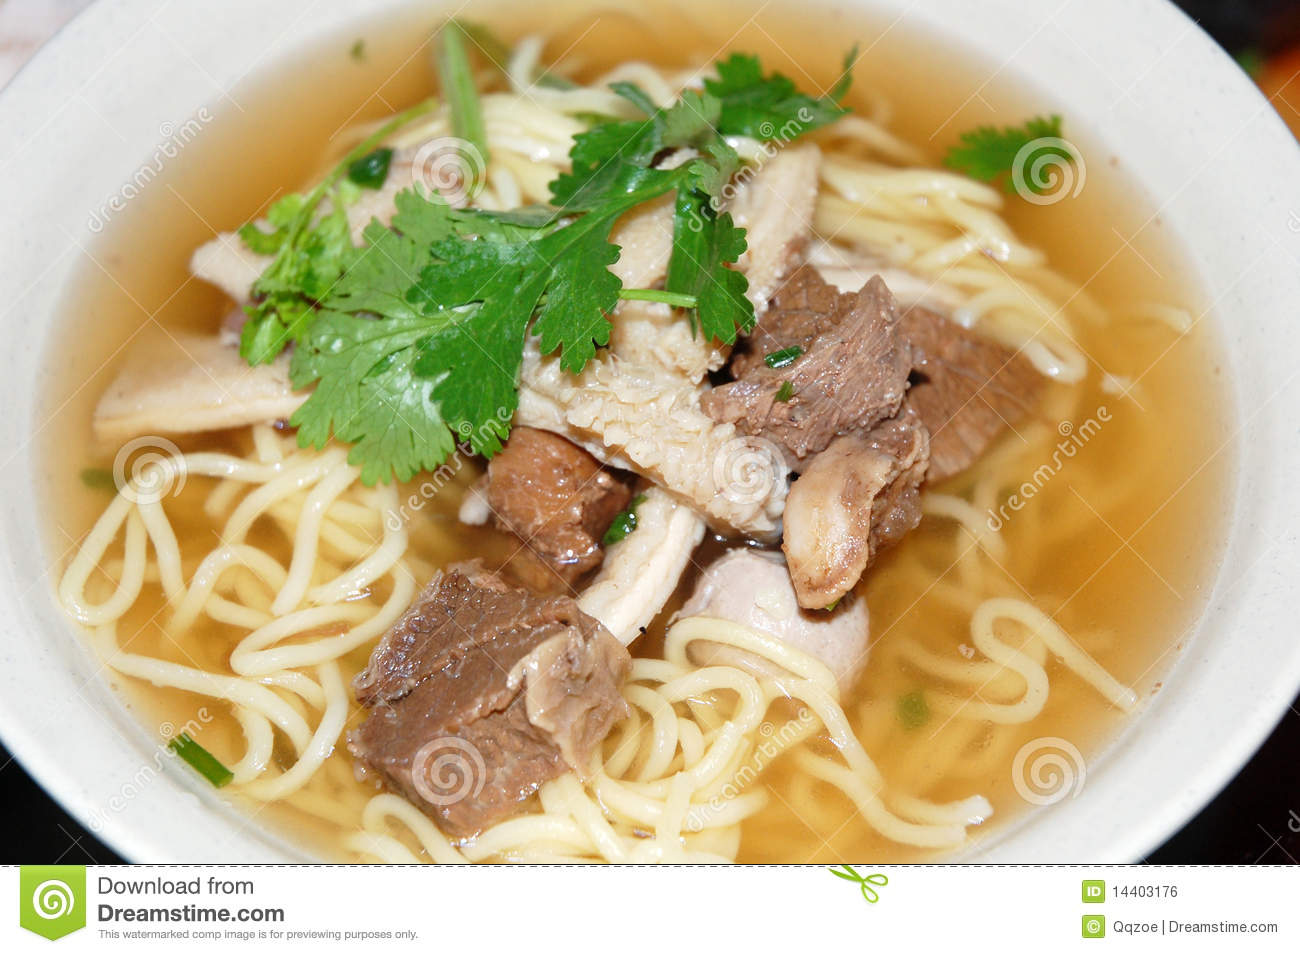 Mixed Beef Noodles Soup Royalty Free Stock Image   Image  14403176